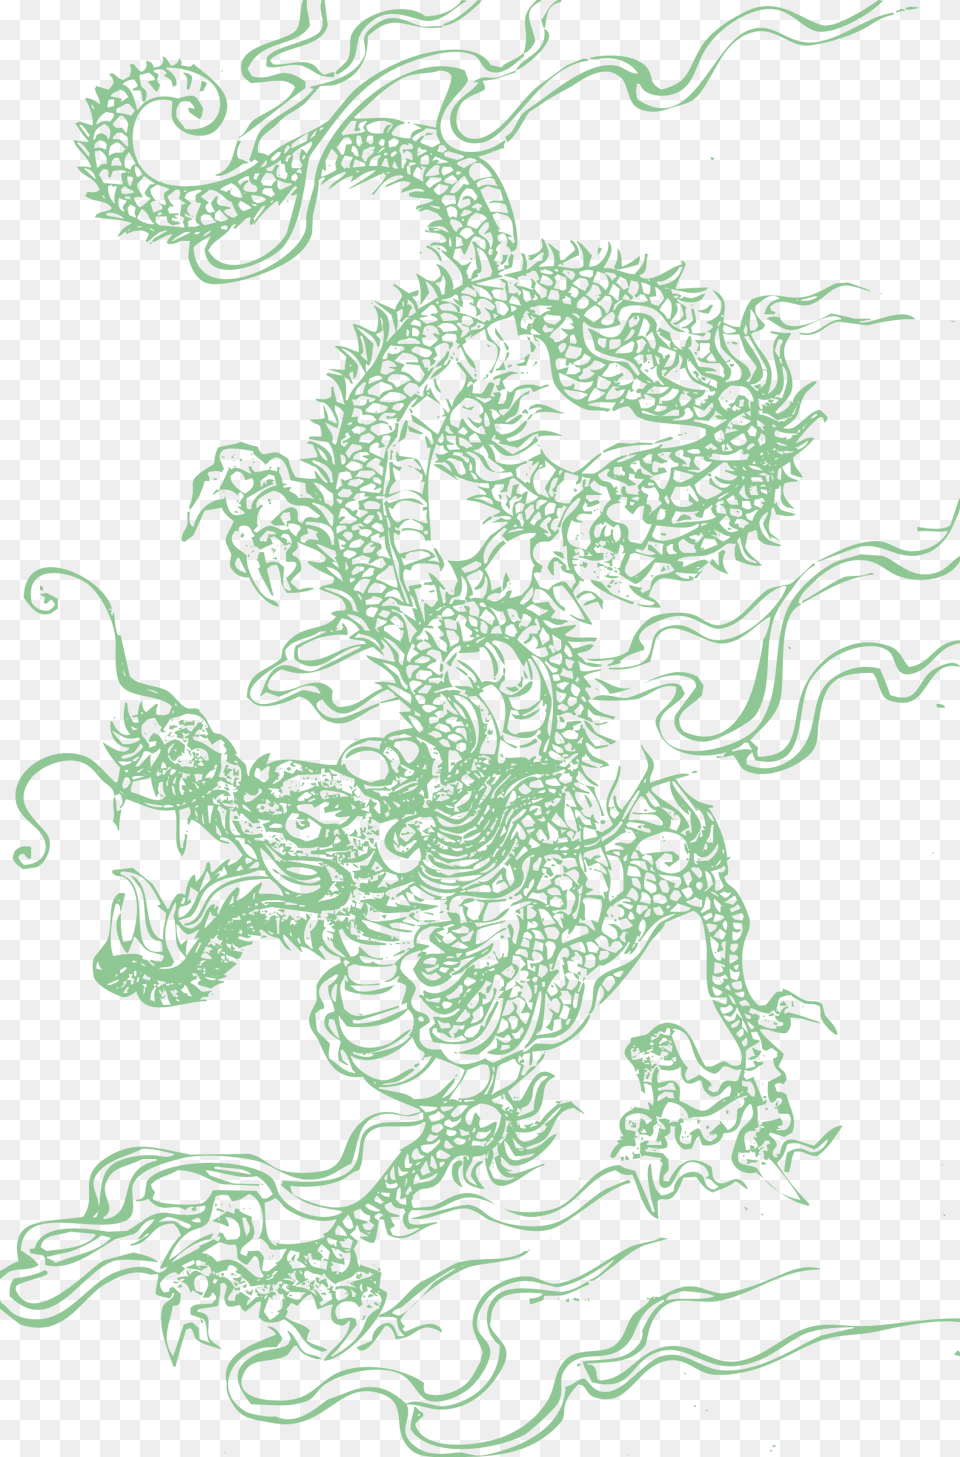 2 Chinese Dragon Hd, Green Free Png Download